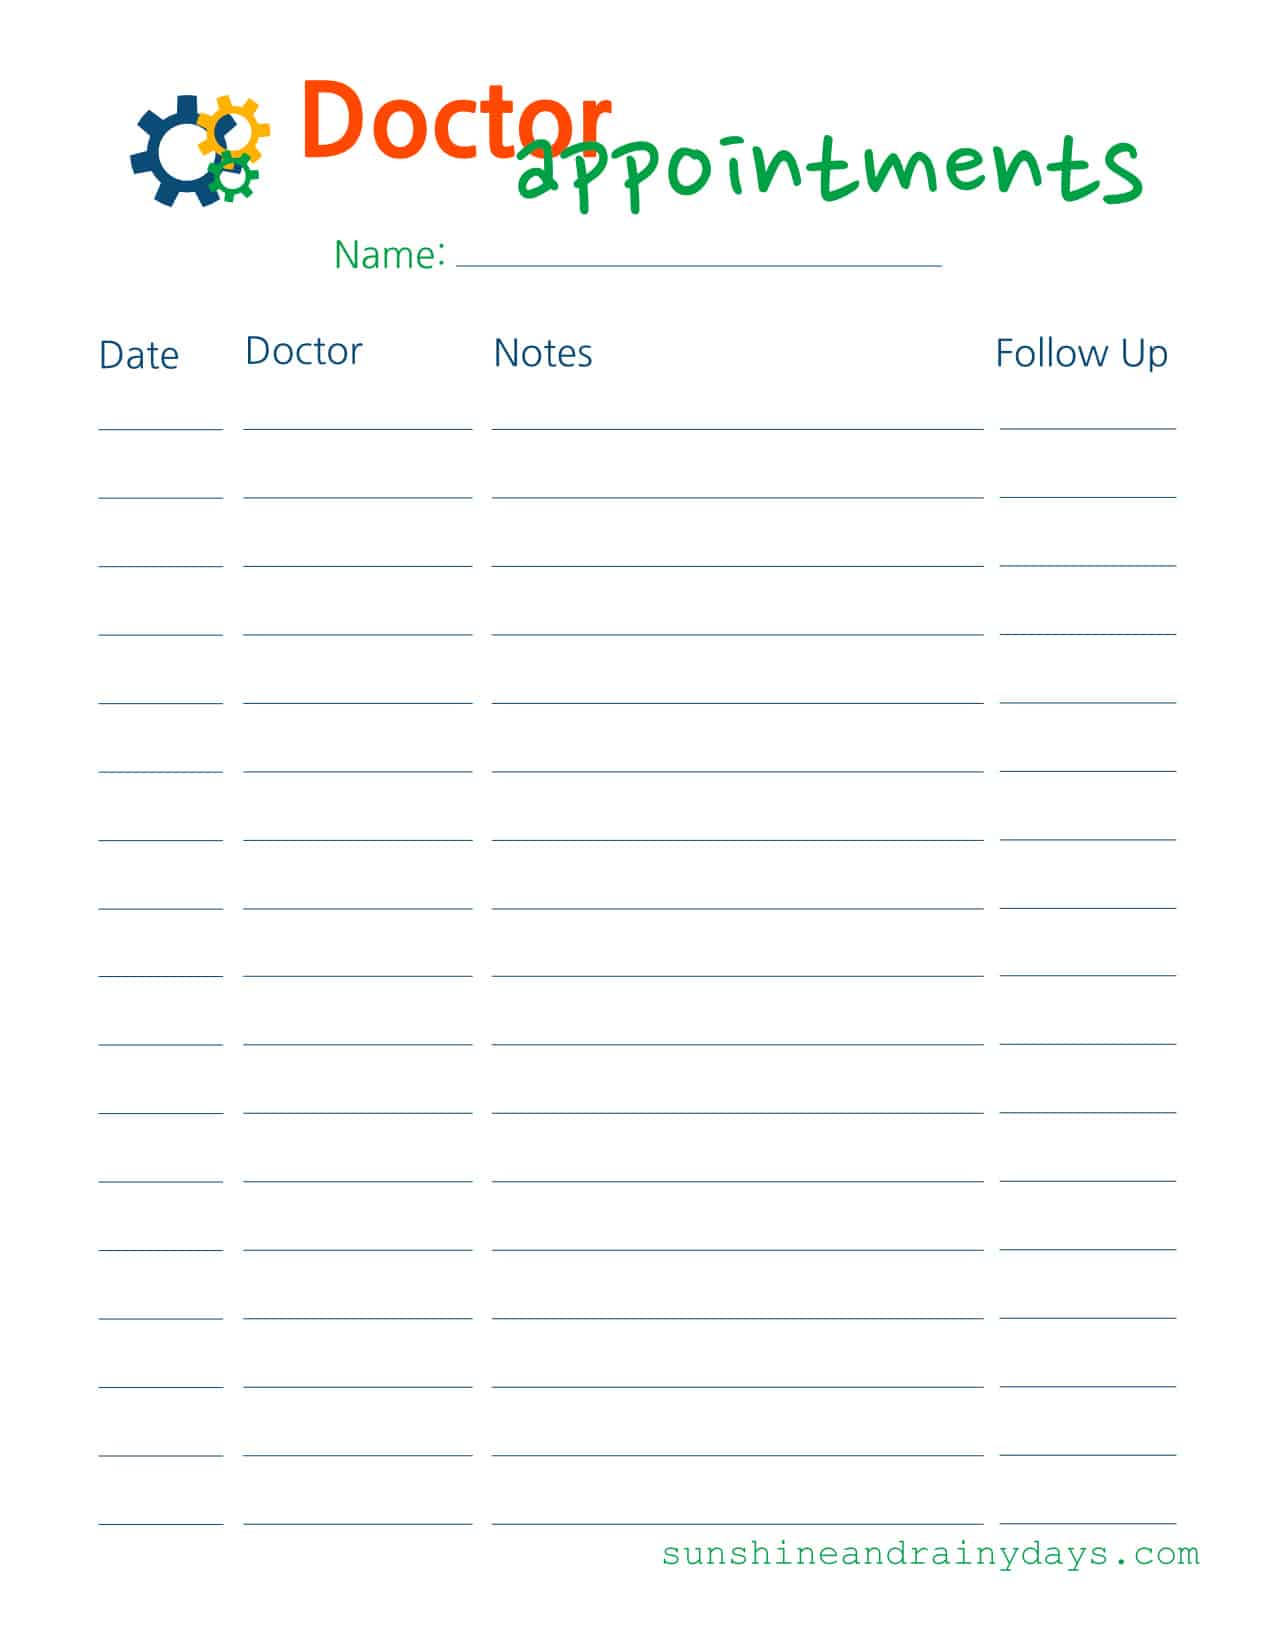 Doctor Appointments Free Printable - Log Your Doctor Visits - Sunshine